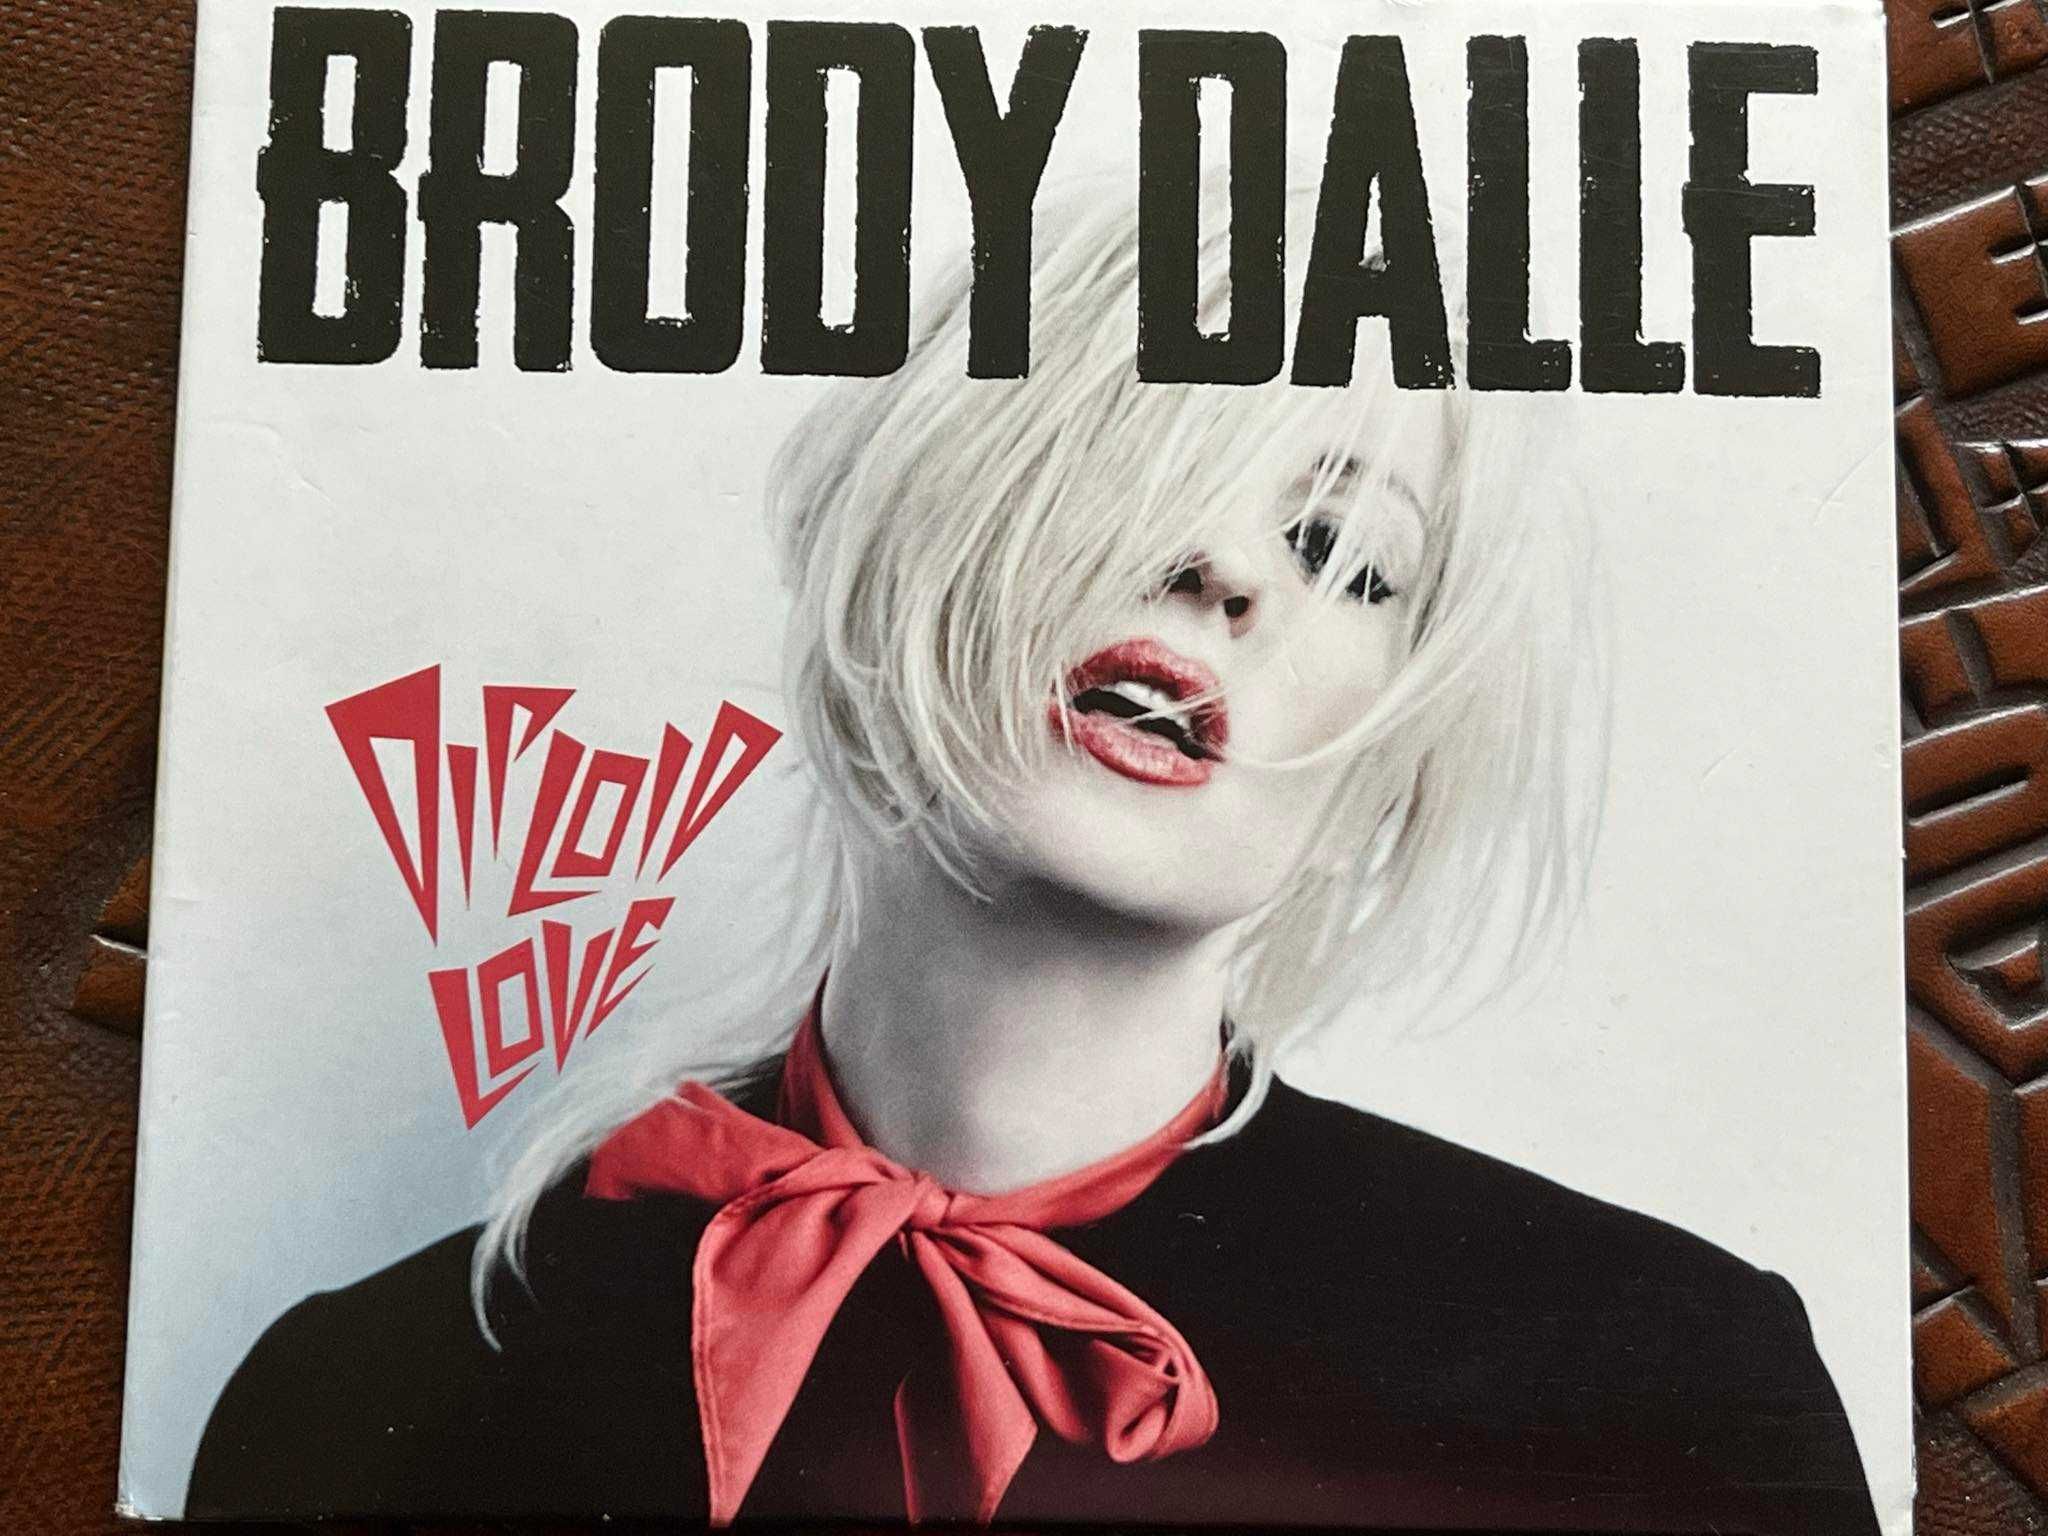 Brody Dalle - Diploid Love - CD - stan EXTRA!